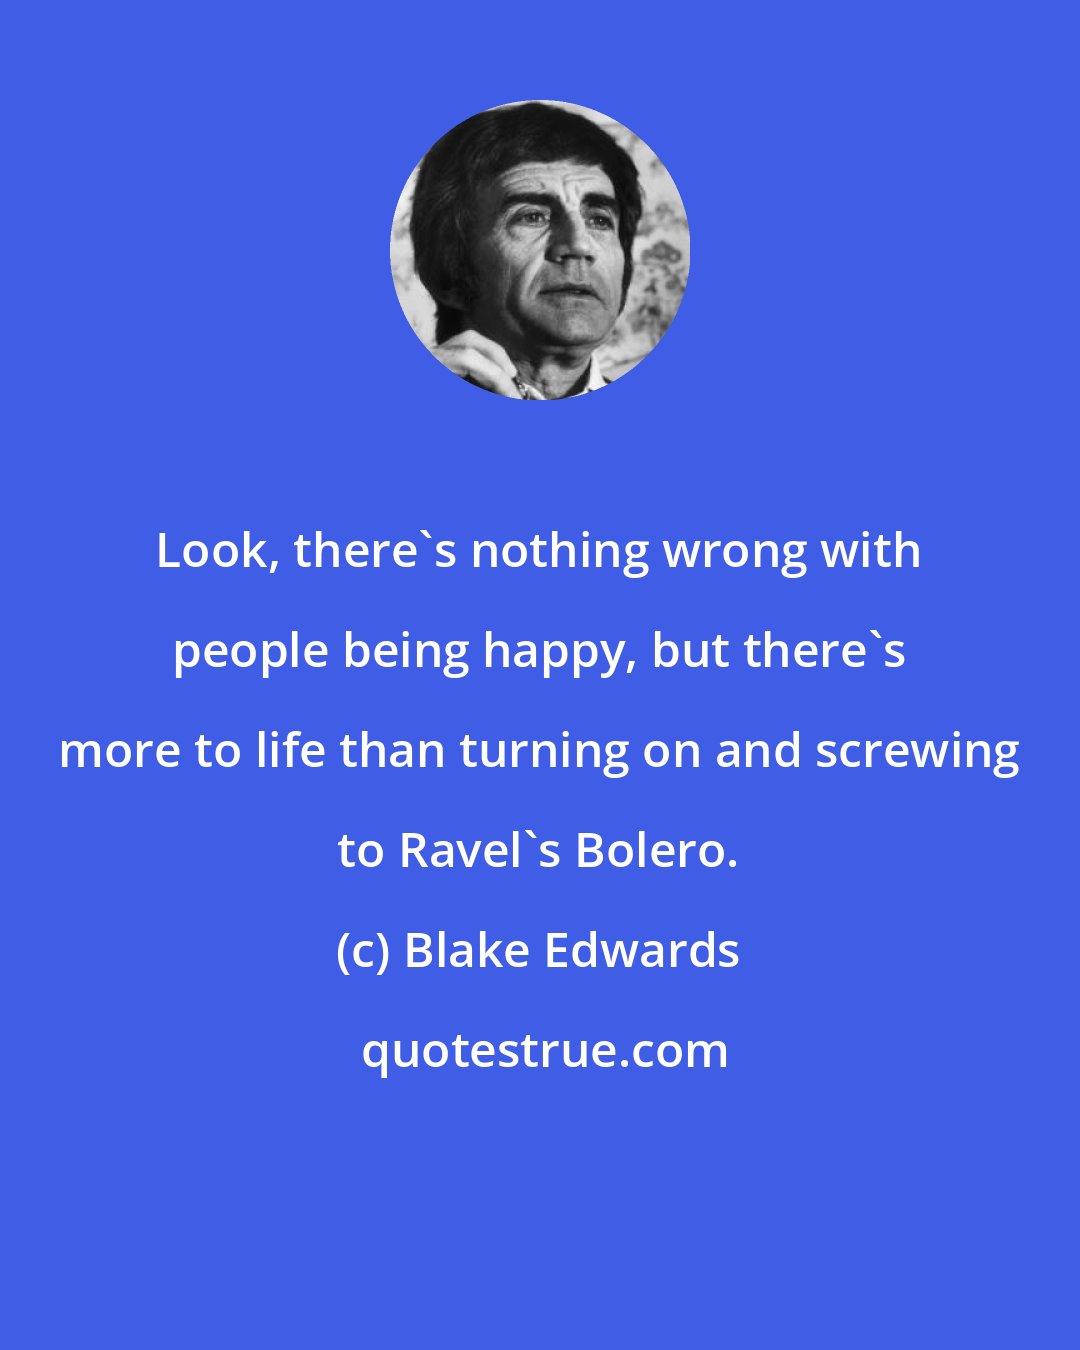 Blake Edwards: Look, there's nothing wrong with people being happy, but there's more to life than turning on and screwing to Ravel's Bolero.